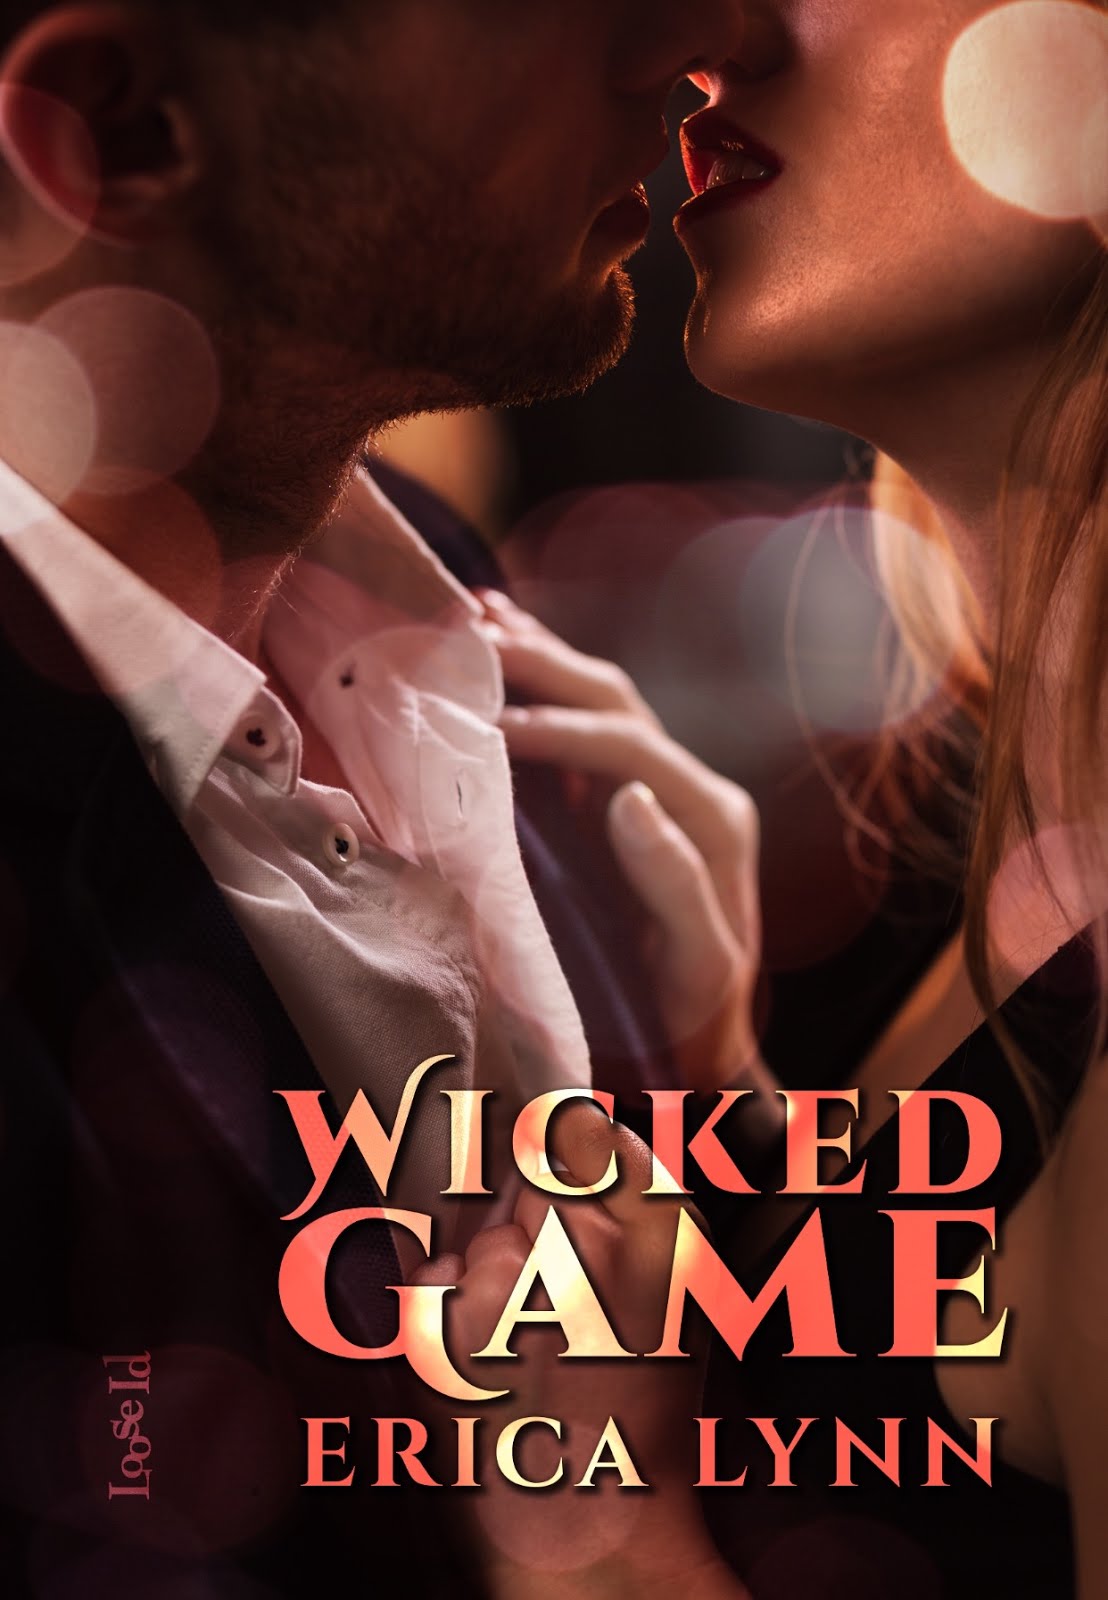 WICKED GAME BY ERICA LYNN